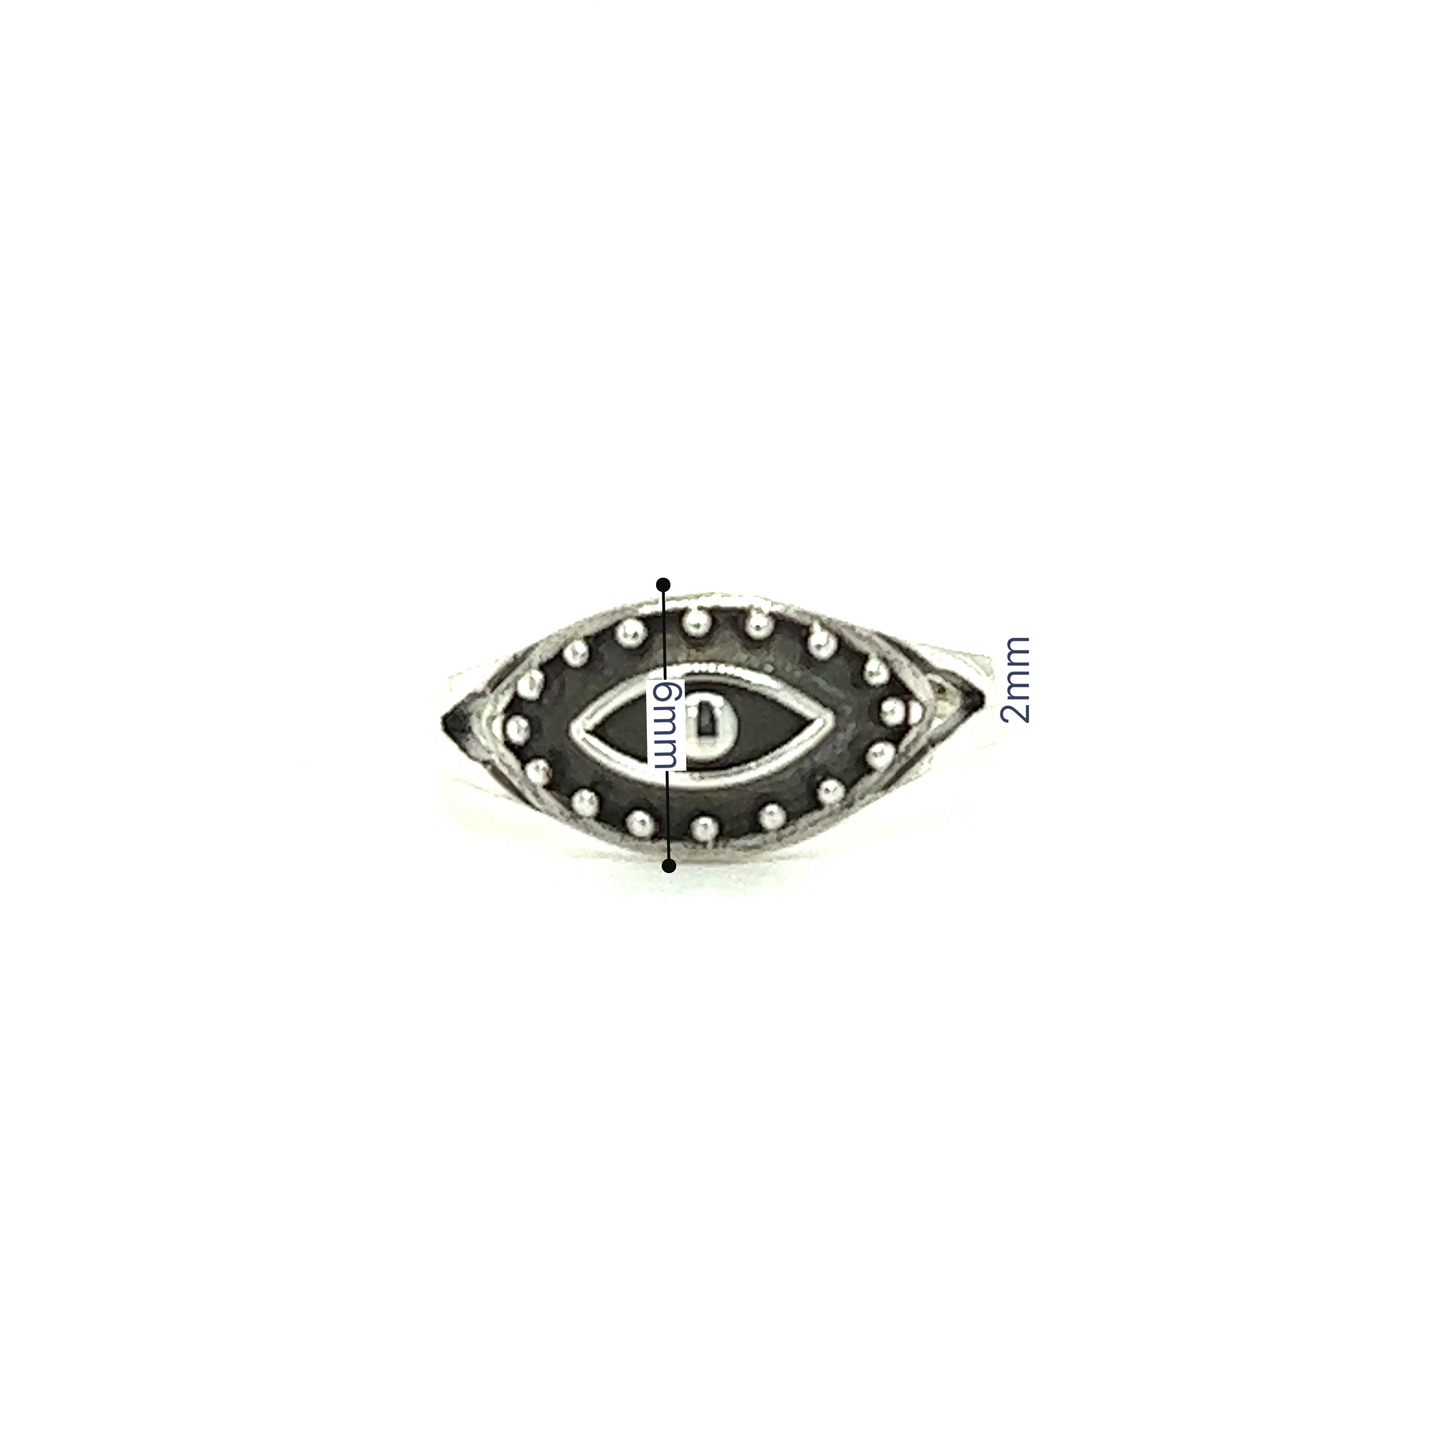 A modern Dotted Eye Ring with a black and silver design.